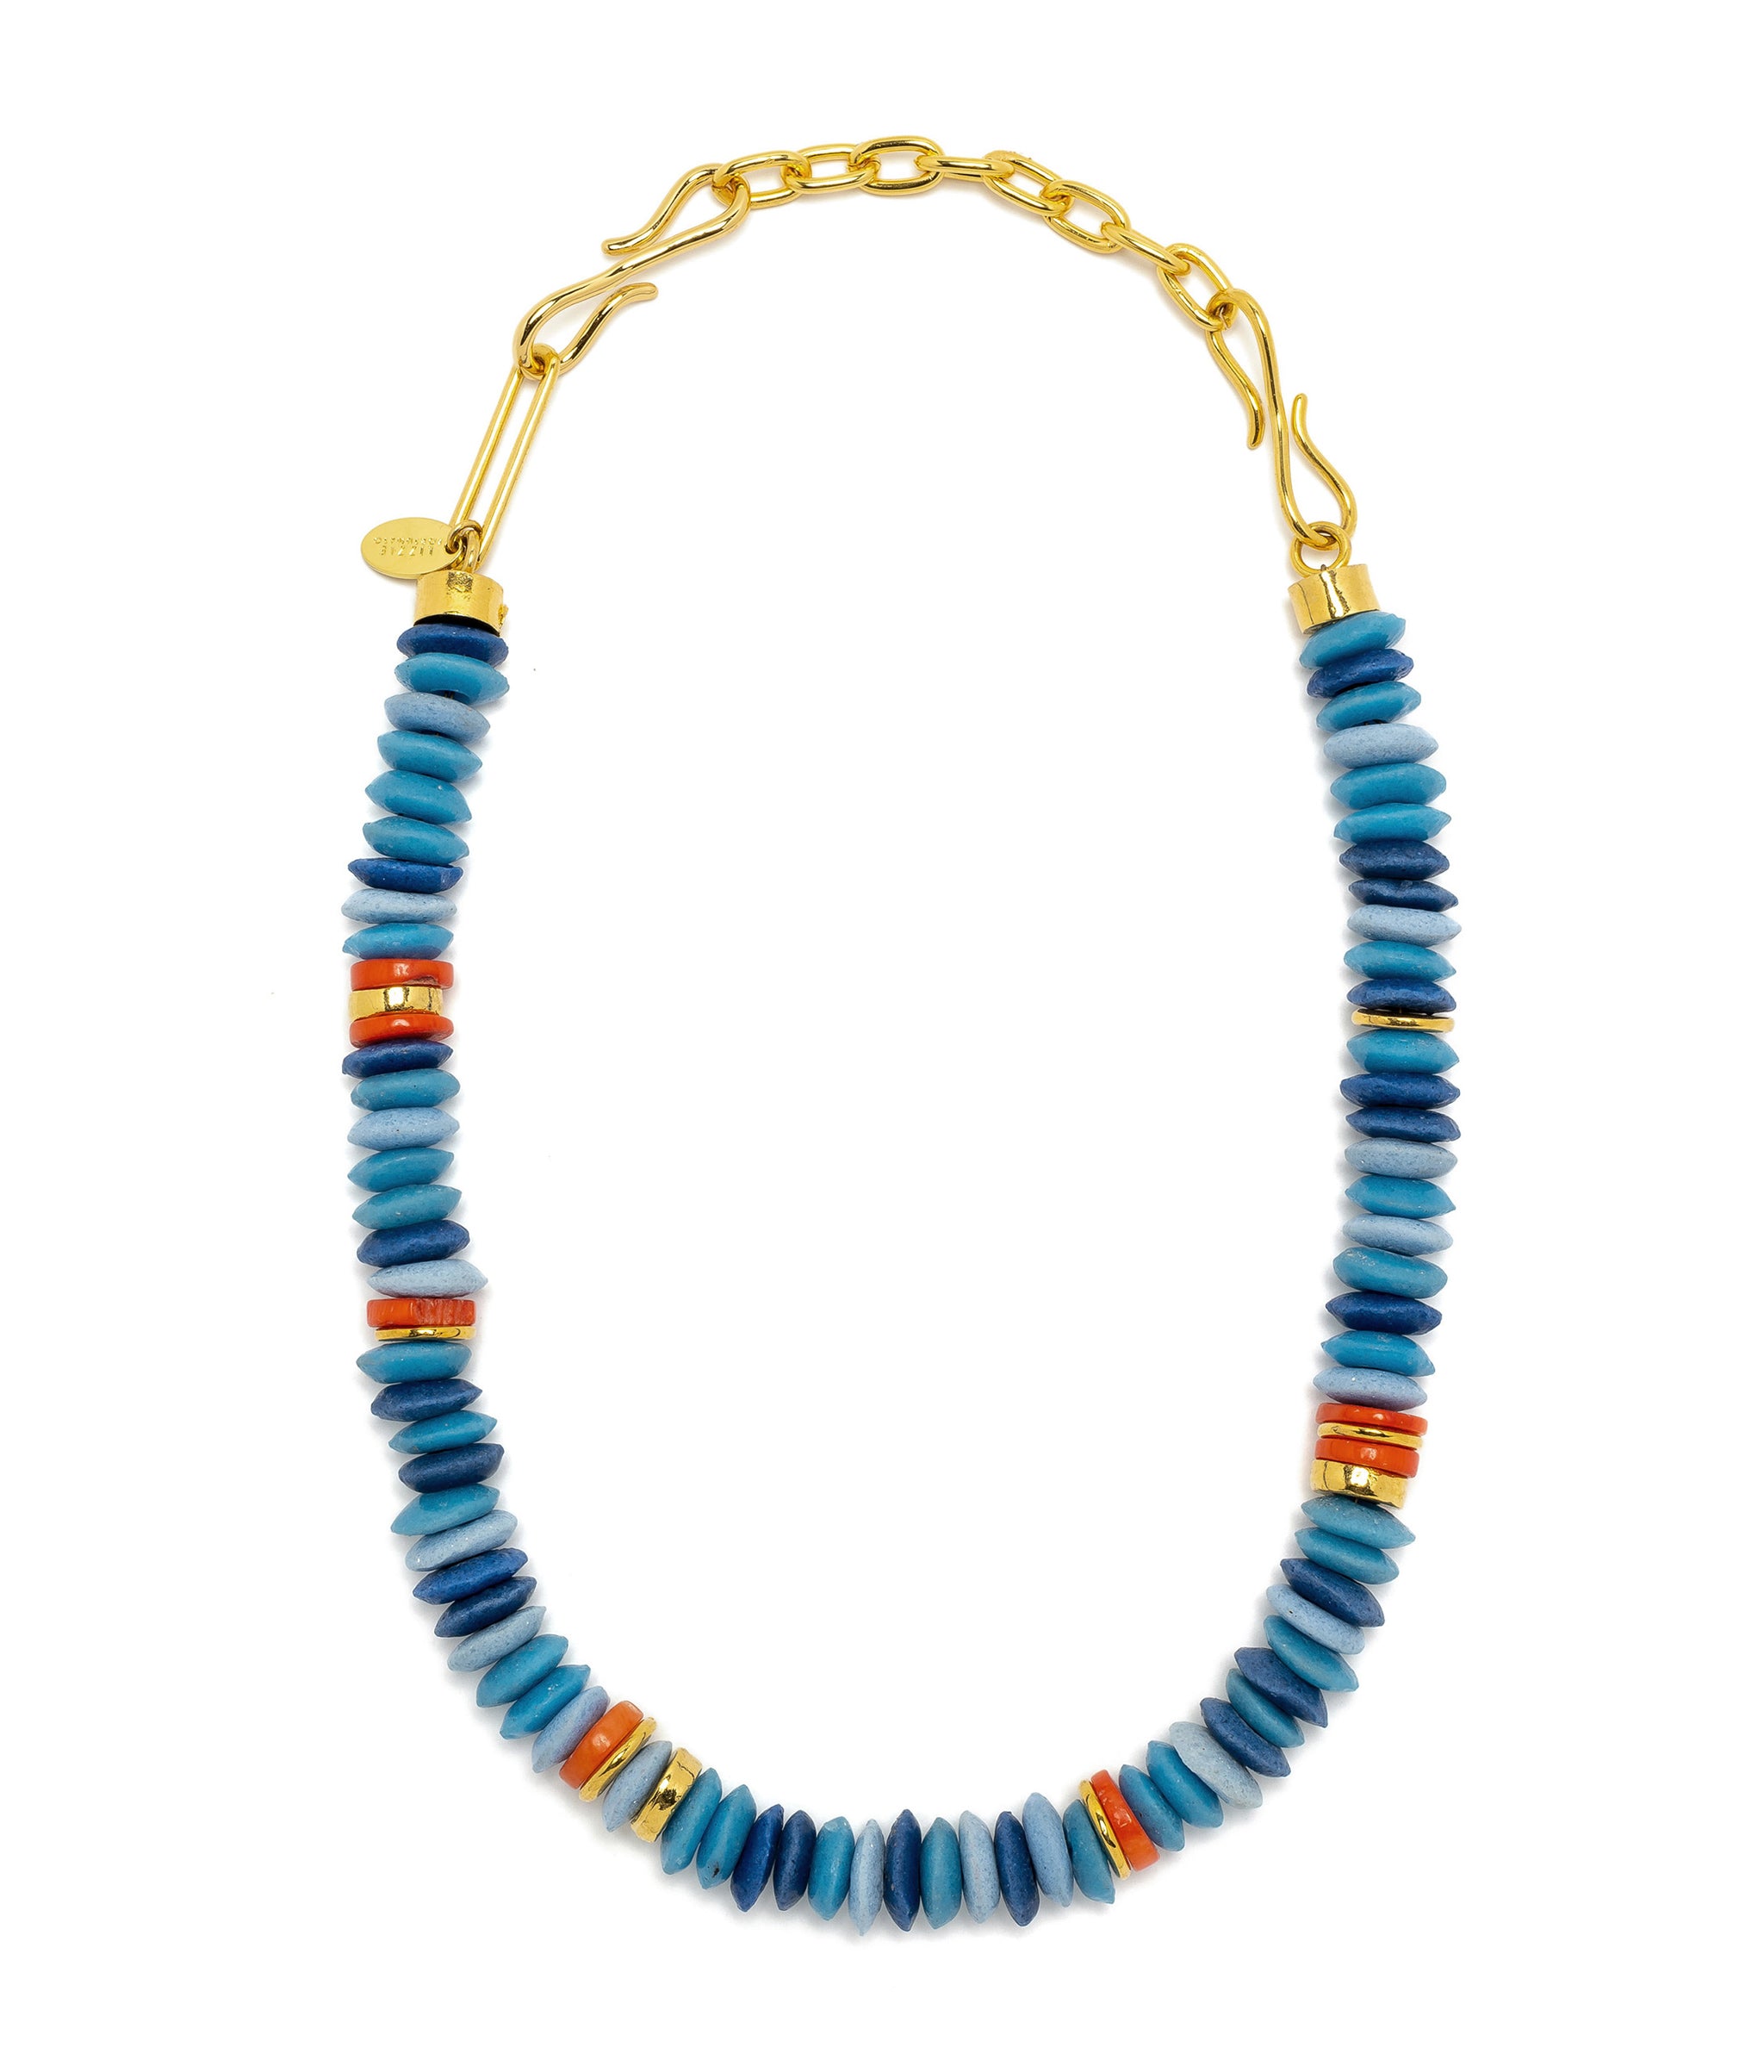 4.25" Gold Extender. Gold-plated brass long link chain with S-hook, attached to Laguna Necklace in Denim.